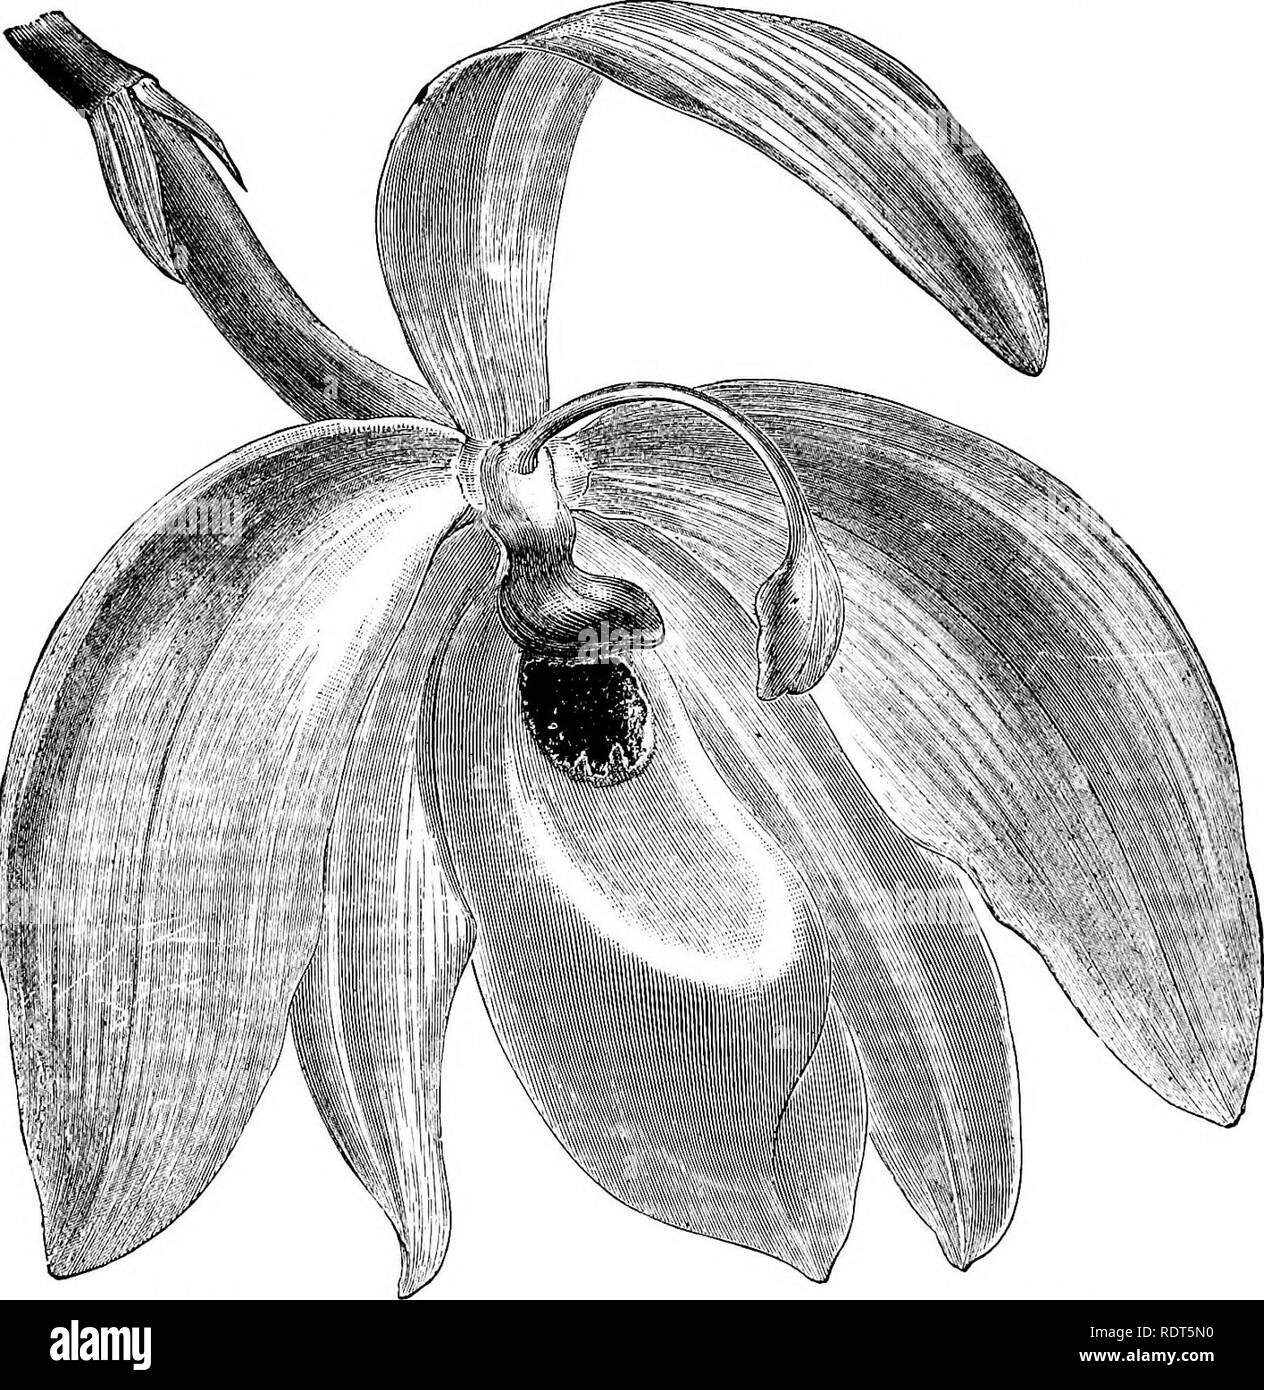 . The orchid-grower's manual, containing descriptions of the best species and varieties of orchidaceous plants in cultivation ... Orchids. 216 OECHID-GROWER S MAXUAL. with two large rounded wings, and the front or epichil cordate ovate and jointed on to the hypochil. The column is very long, slender, and arched, enlarged and hooded at the apex.—Costa Bica, Nevj Grenada. ¥lG.—Bot. Mag., t. 4479. Syn.—PoJycycnix harhnta. C. CHLOROCHILON, Khtzsch.—A very interesting species, conamonly called the Swan Orchid, with the usual fleshy stems and ribbed leaves, the. CYCNOCHES CHLOKOCHILOX. (From the O'a Stock Photo